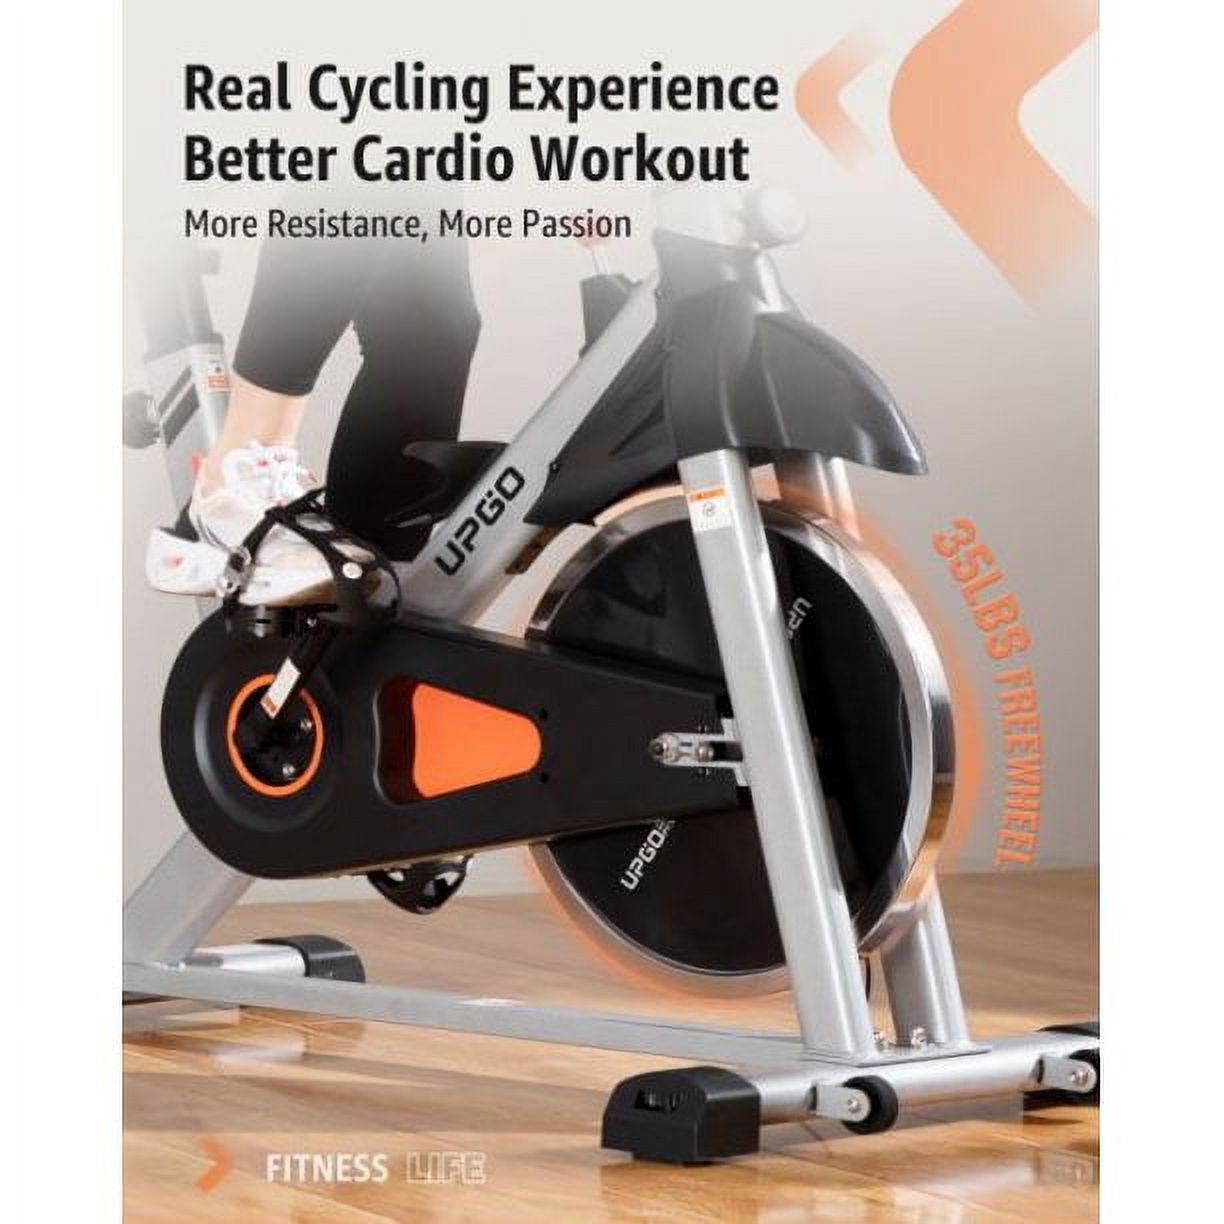 UPGO Indoor Cycling Bike Stationary Bike with 270lb Max Weight Exercise Bicycle with Ipad Mount & Comfortable Seat Cushion for Home Cardio Workout - image 5 of 11